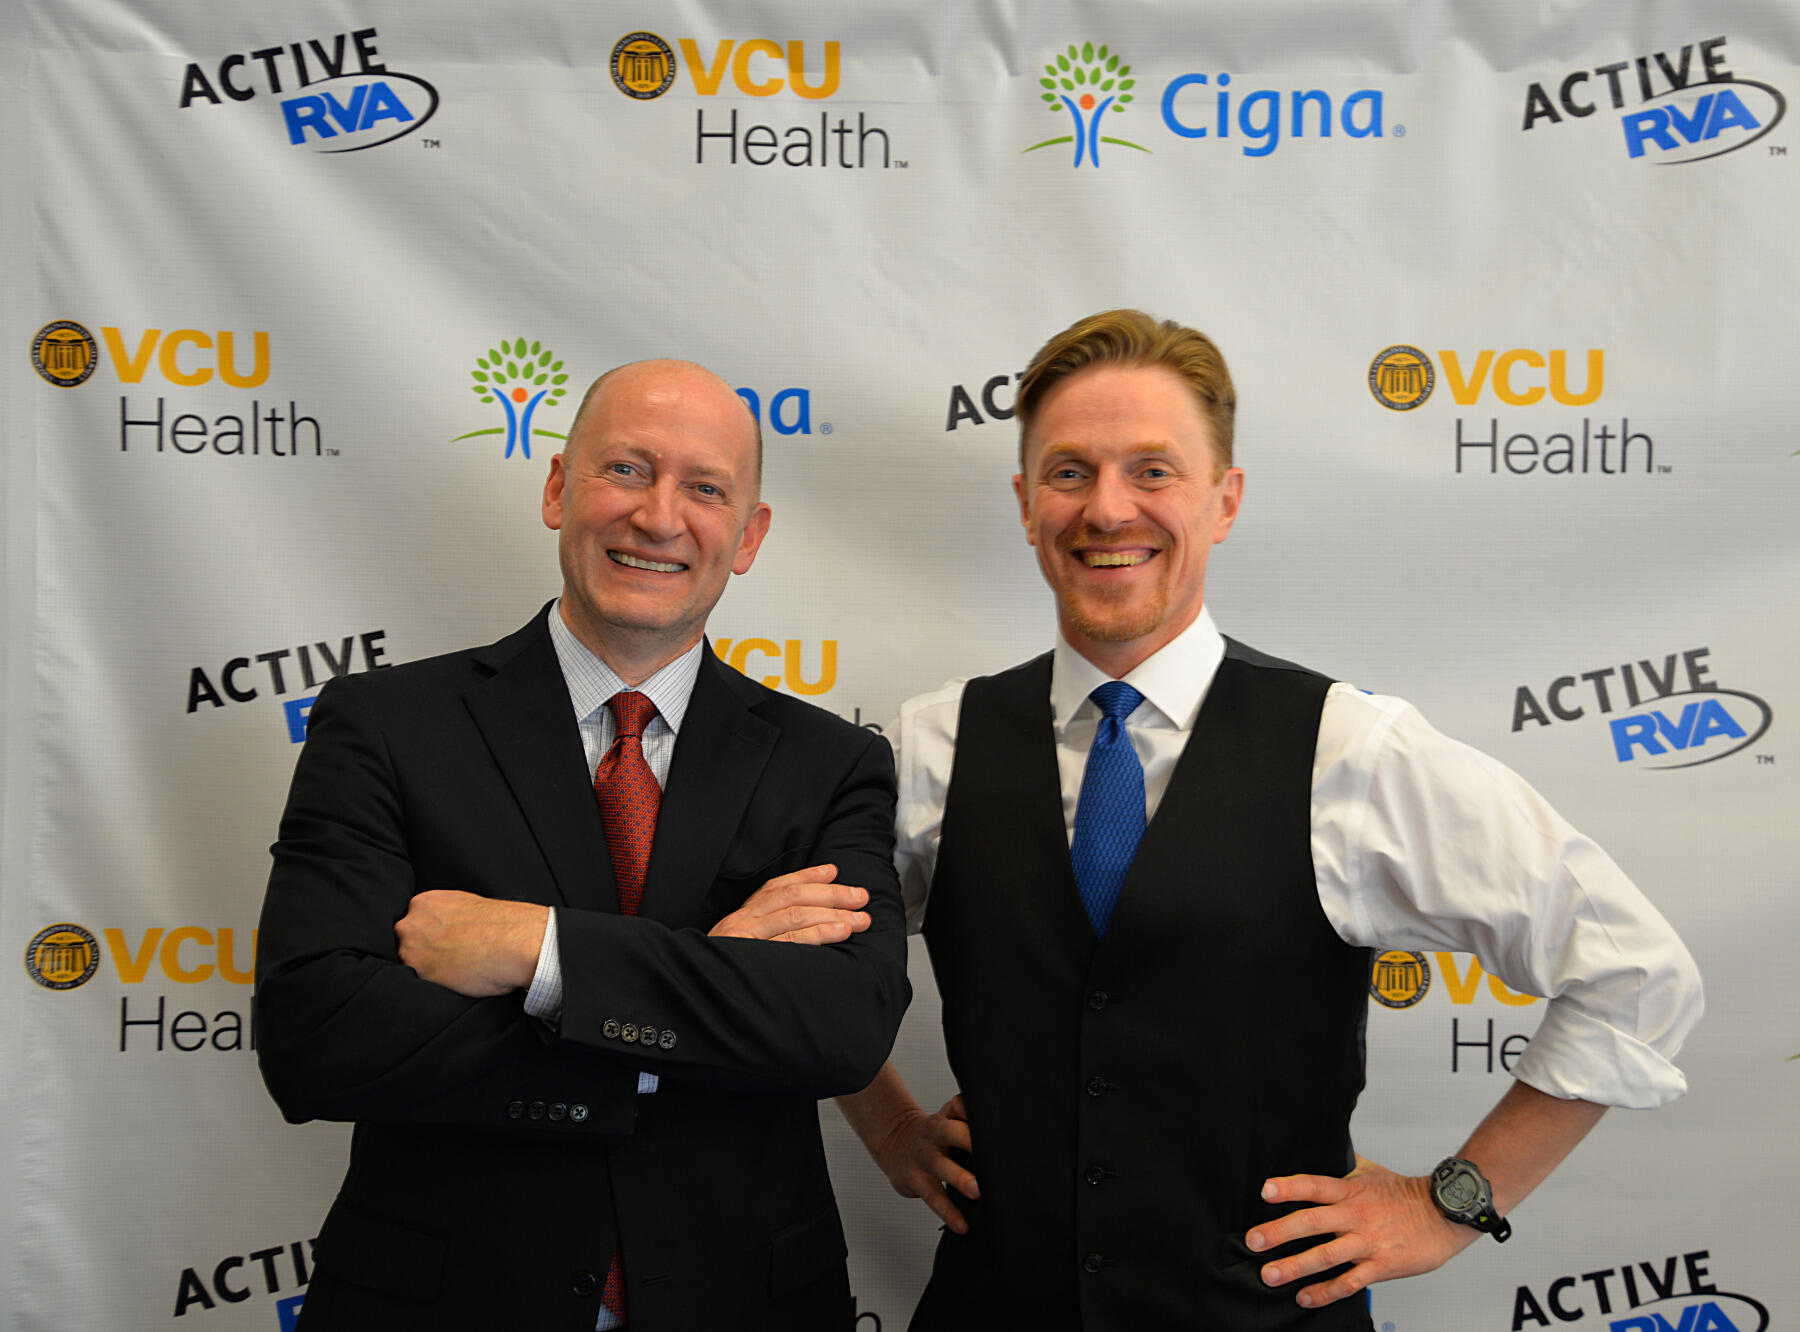 Hernando Mississippi Mayor Chip Johnson and Active RVA Director Jeff McIntyre at the Active RVA Summit.